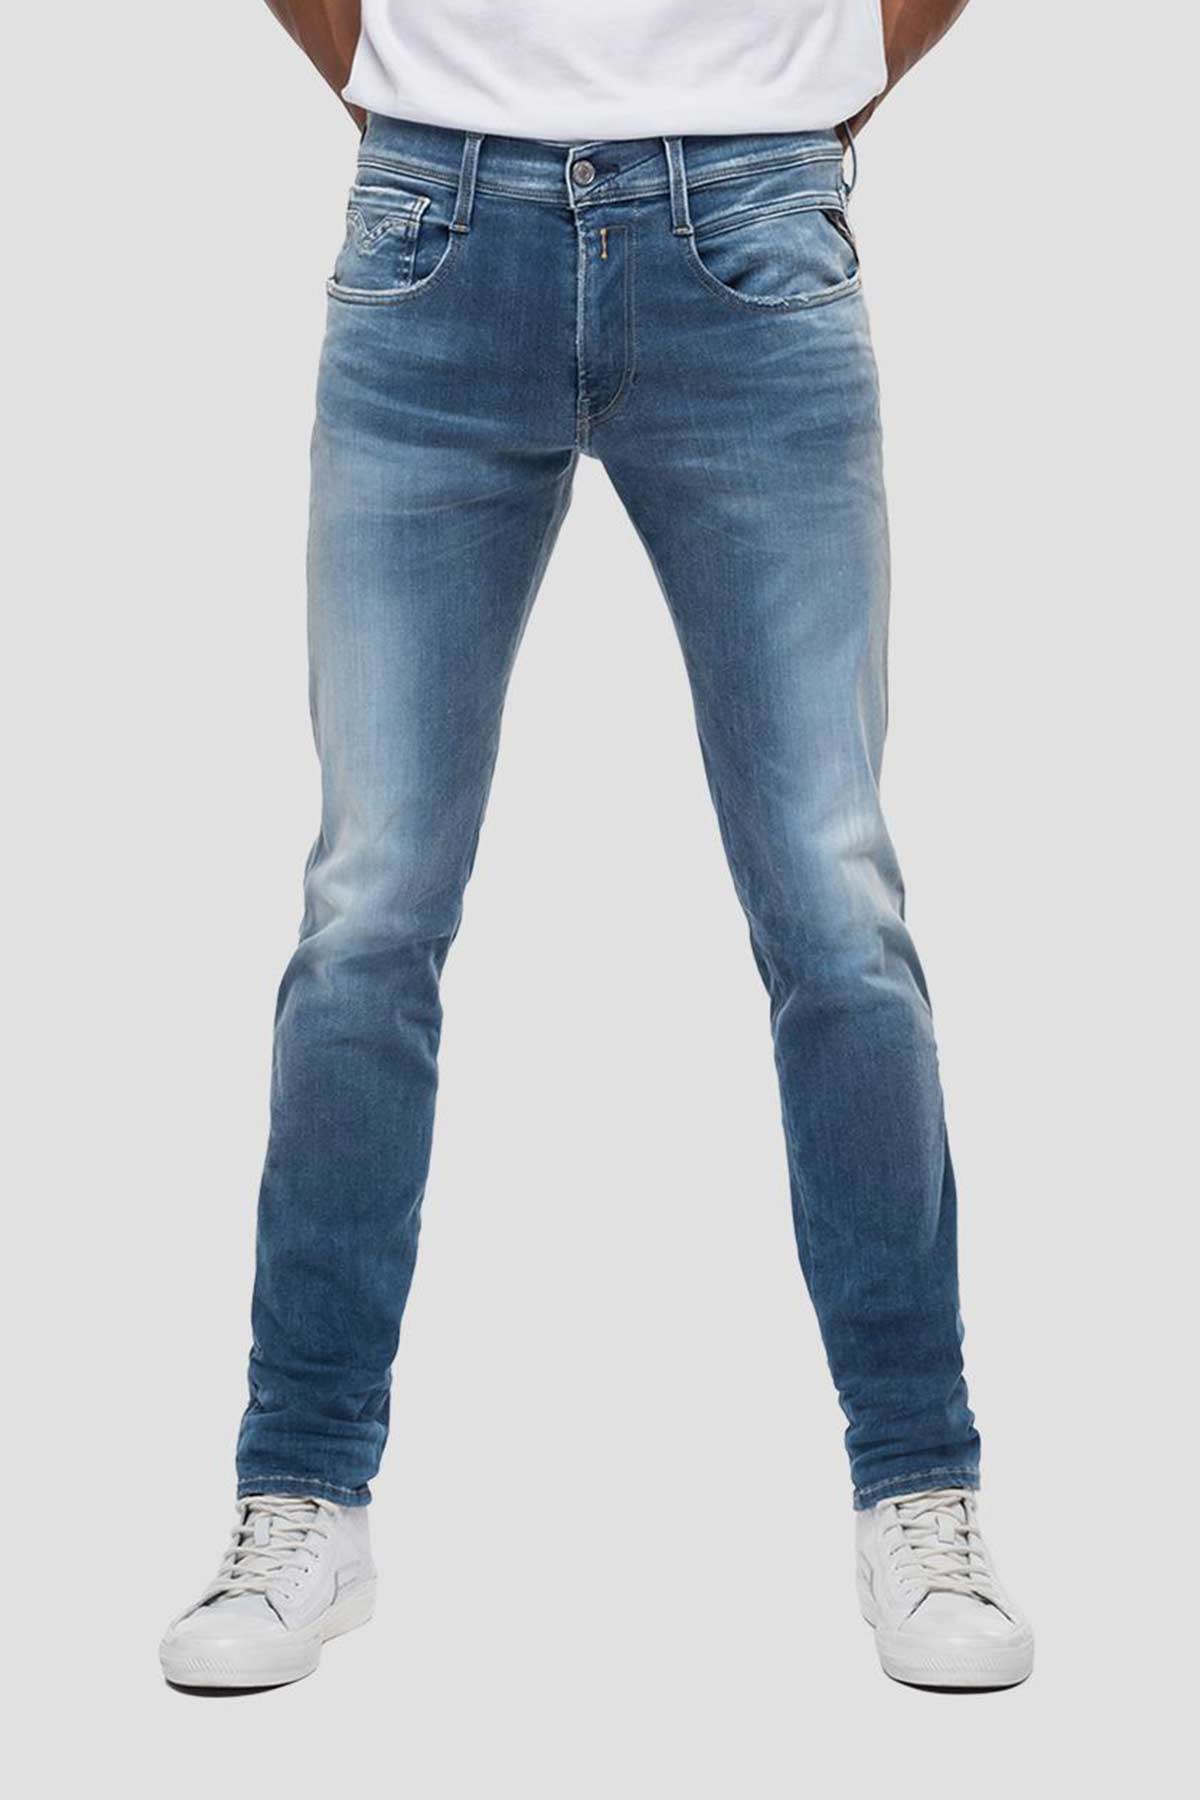 Replay Anbass Hyperflex Re-Used Slim Fit Jeans-Libas Trendy Fashion Store